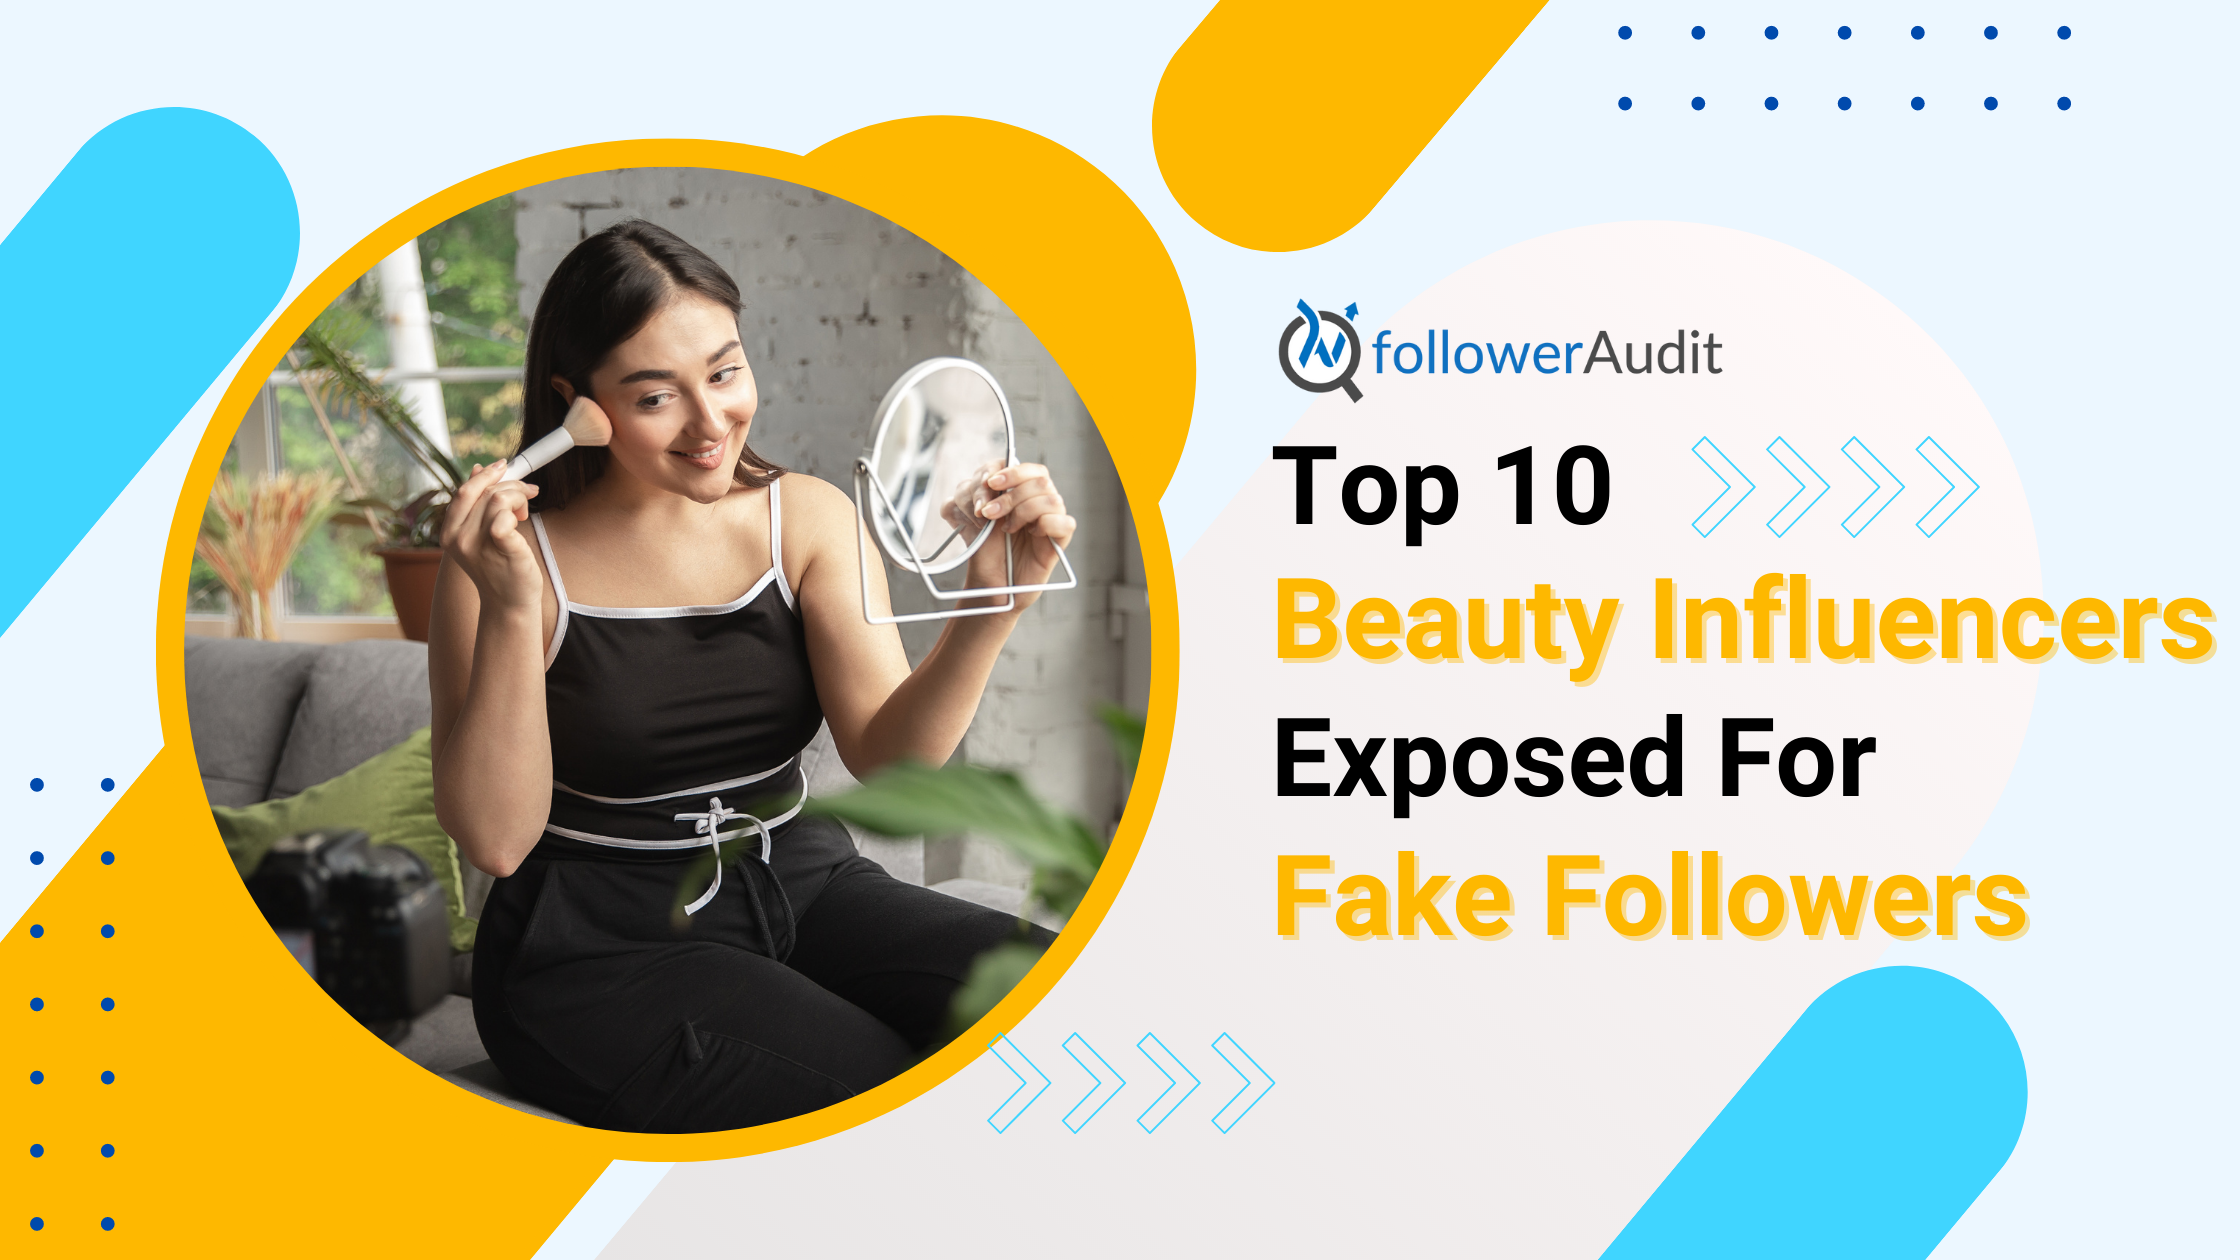 Top 10 Beauty Influencers Exposed For Fake Followers